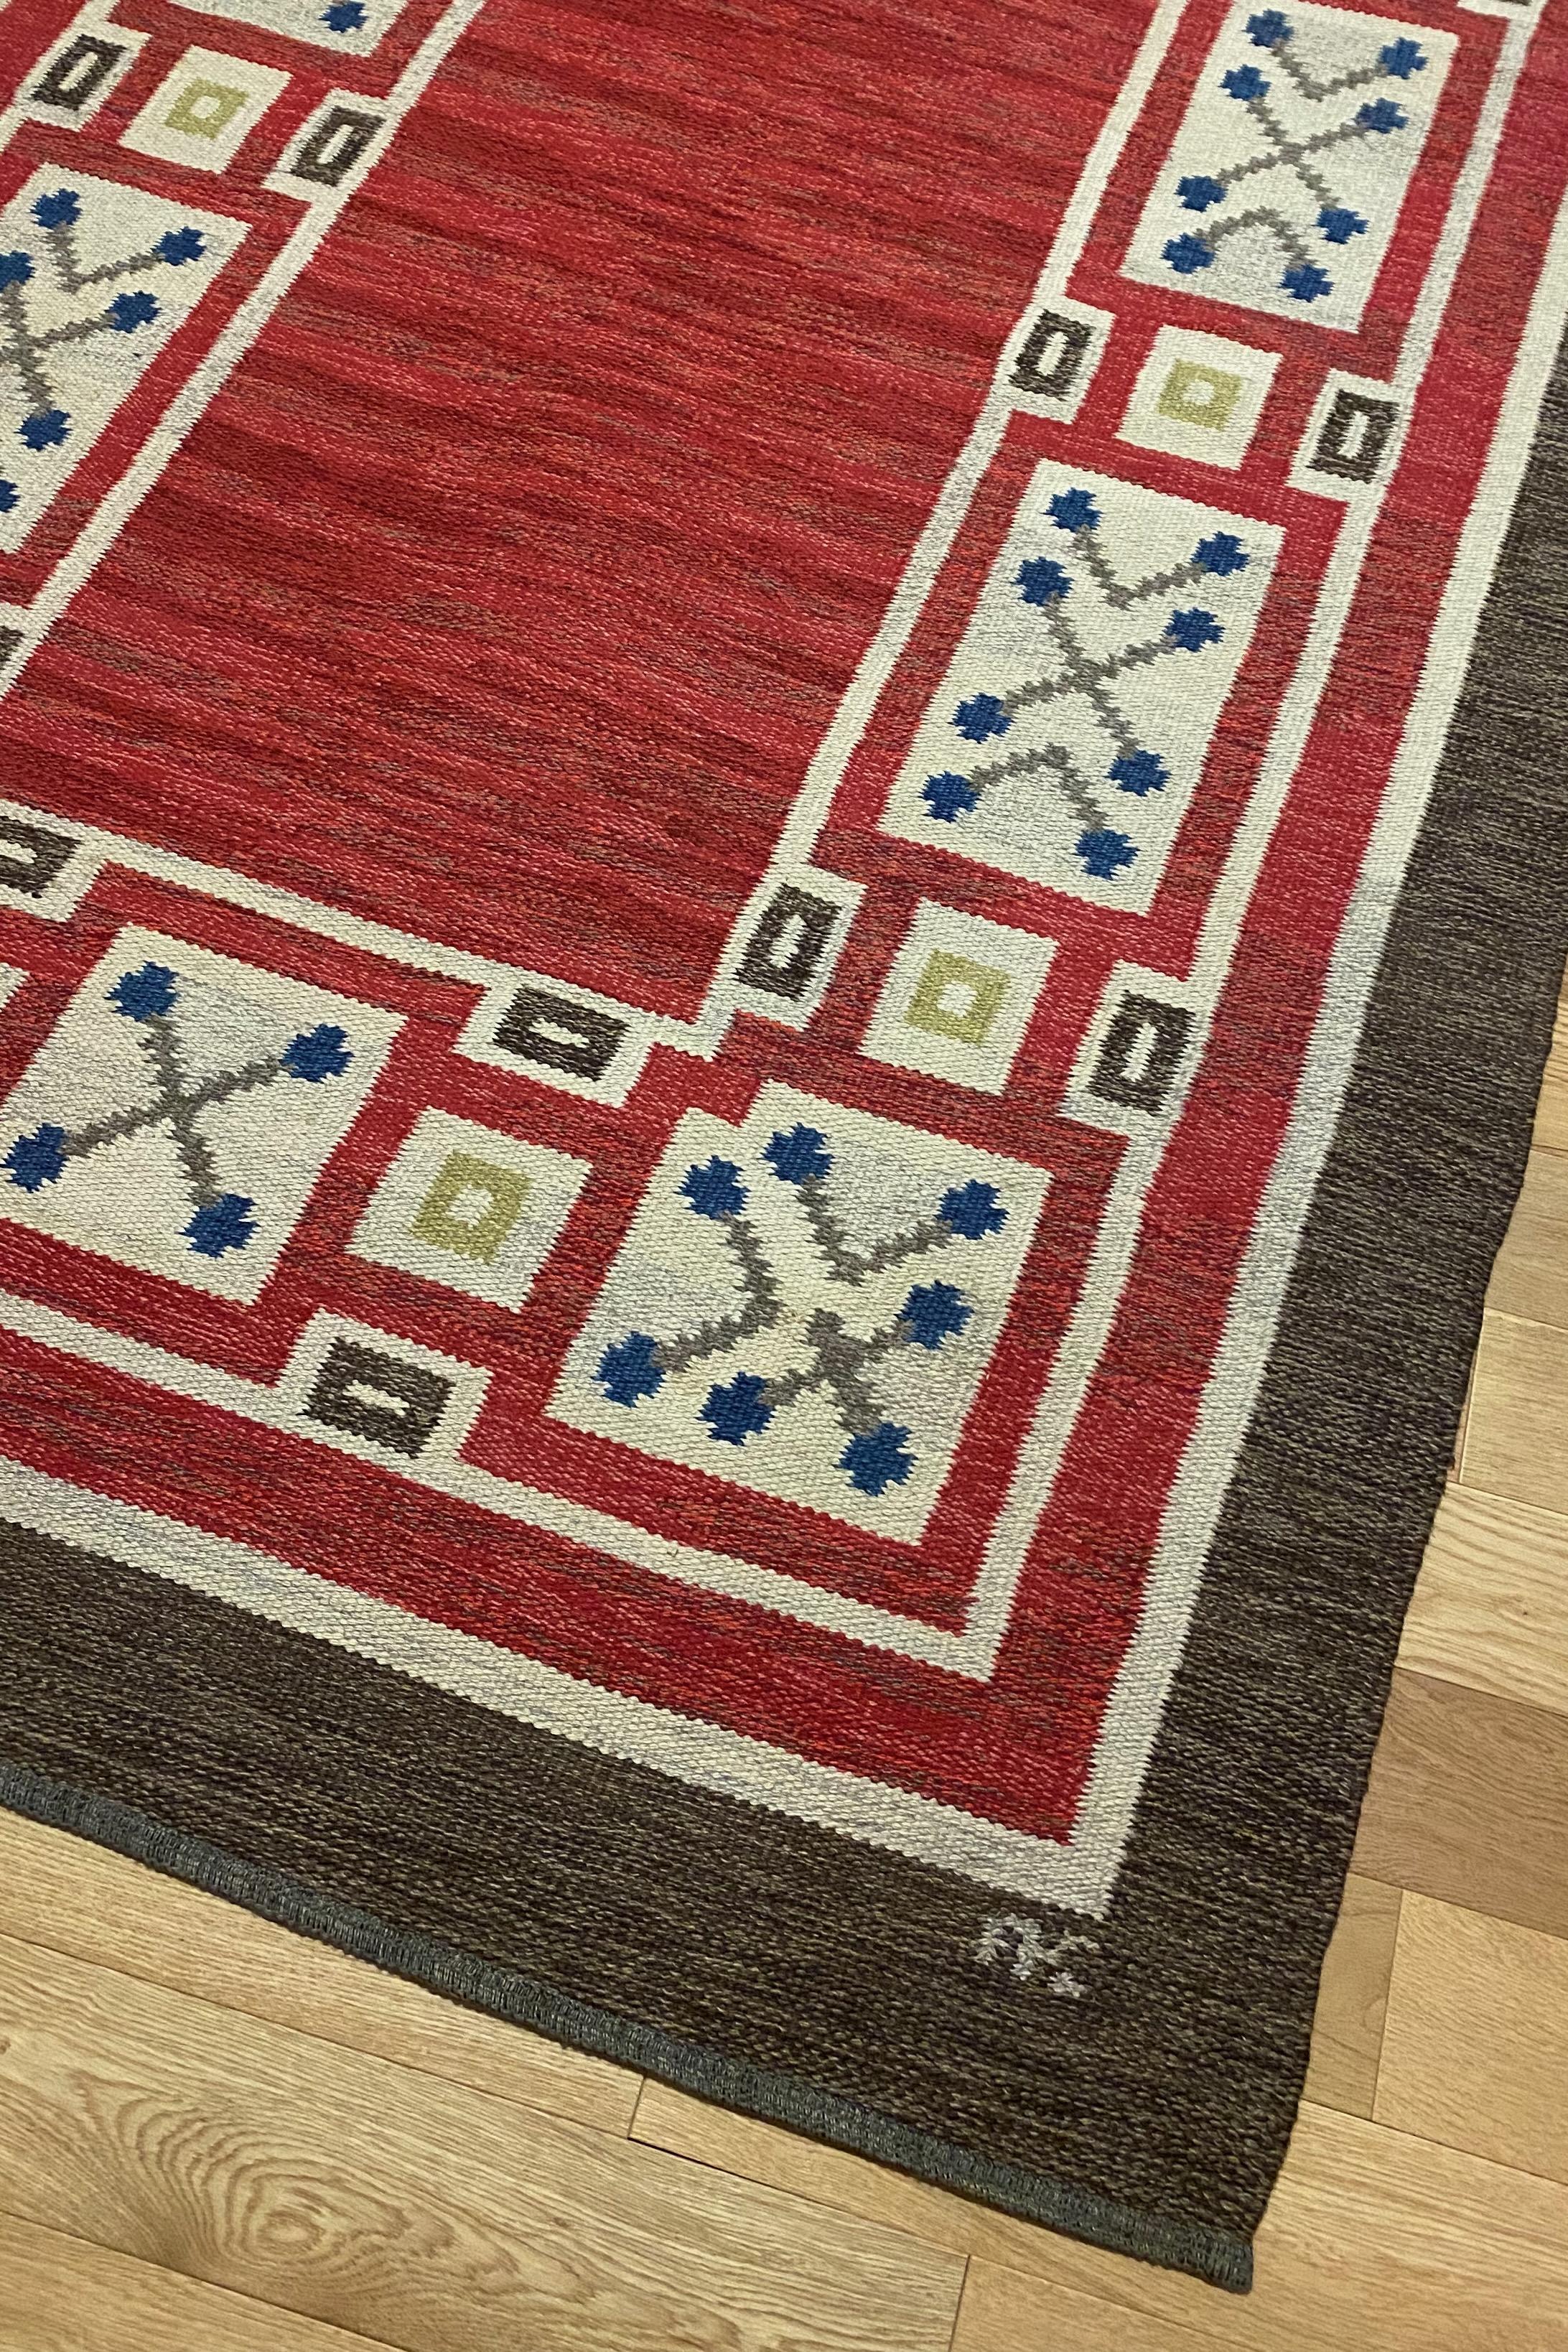 Stunning Mid-Century rug by Aina Kånge with a red and brown base and blue, yellow and sand accent colors. As usual in Aina Kånge designs the pattern is classic and timeless. Her initials are visible at the lower right side. Very good condition with